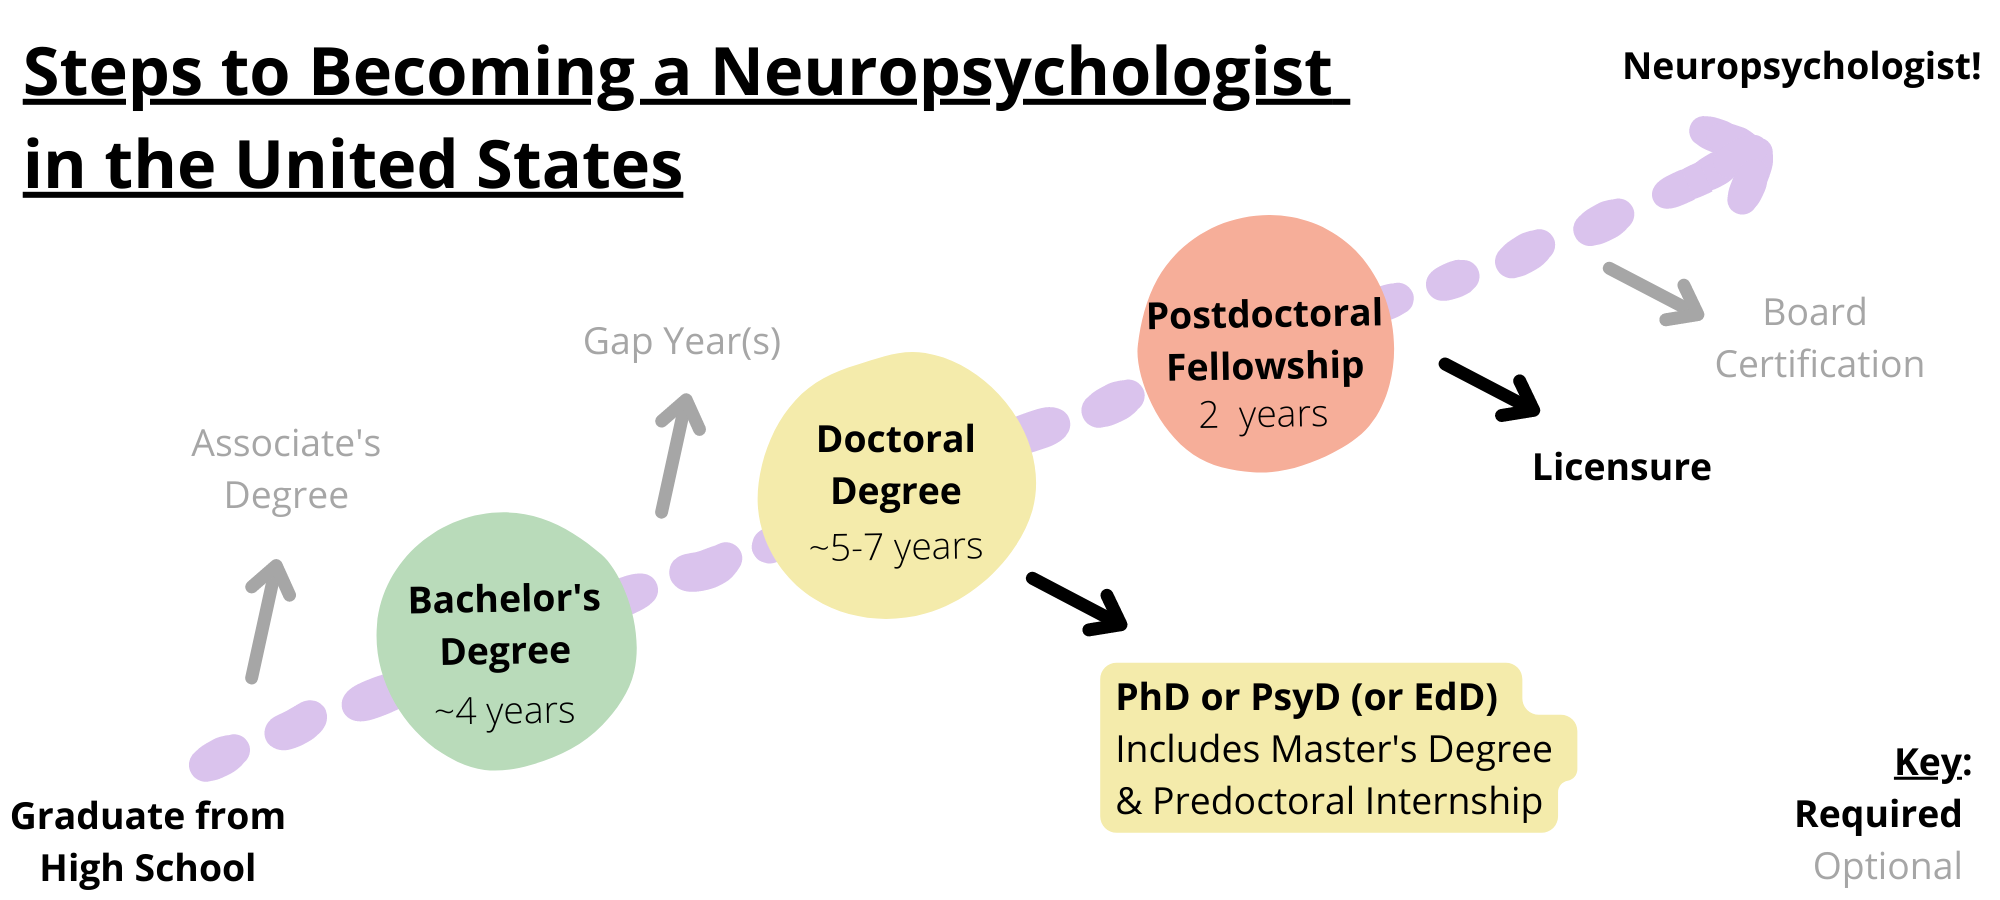 Steps to becoming a neuropsychologist in the United States. Required steps include graduating from high school, obtaining a bachelor’s degree, obtaining a doctoral degree like a PhD, PsyD, or EdD, completing a postdoctoral fellowship, and licensure. Optional steps include obtaining an associate’s degree, taking a gap year, and board certification.